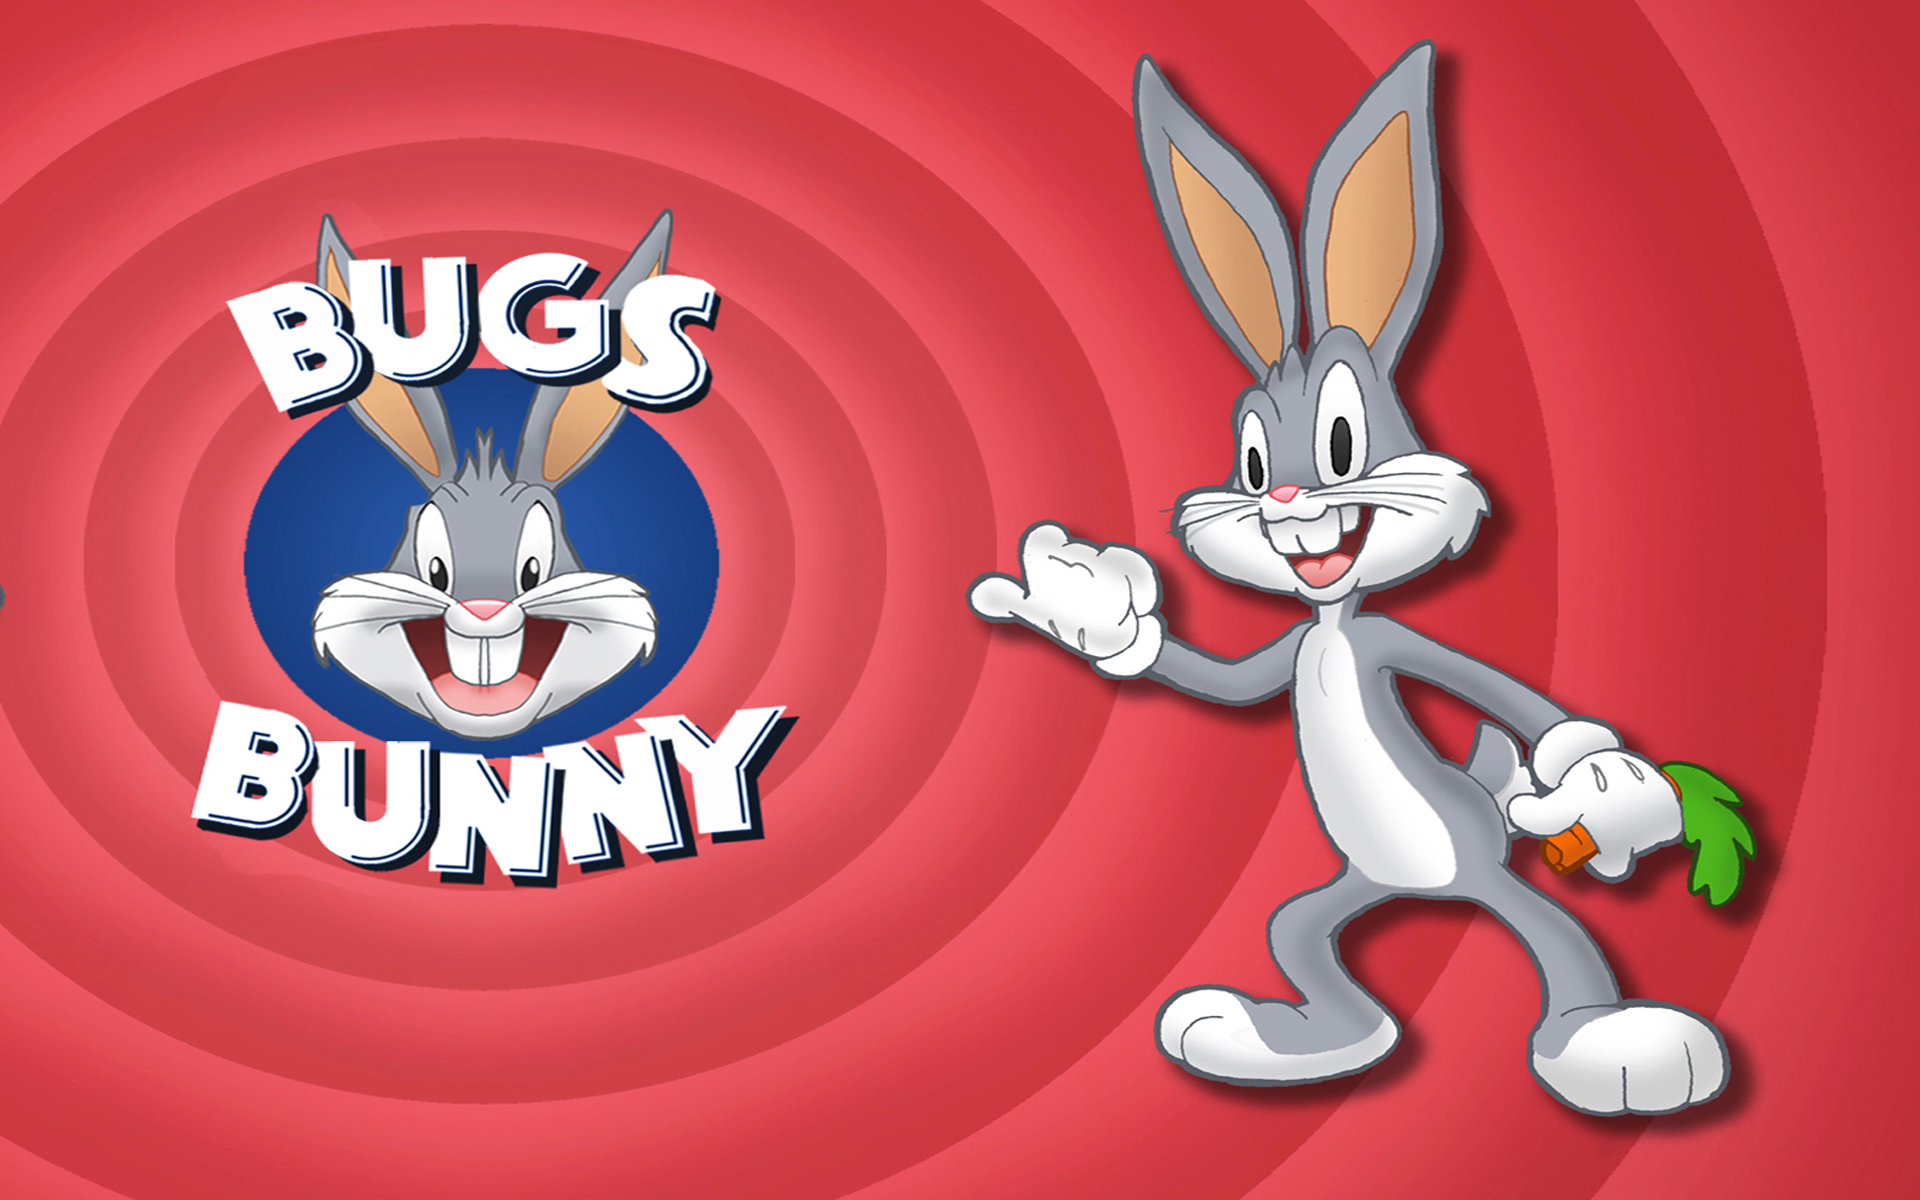 Bugs Bunny Rabbit With Carrot Cartoons For Kids Desktop Backgrounds Free Do...